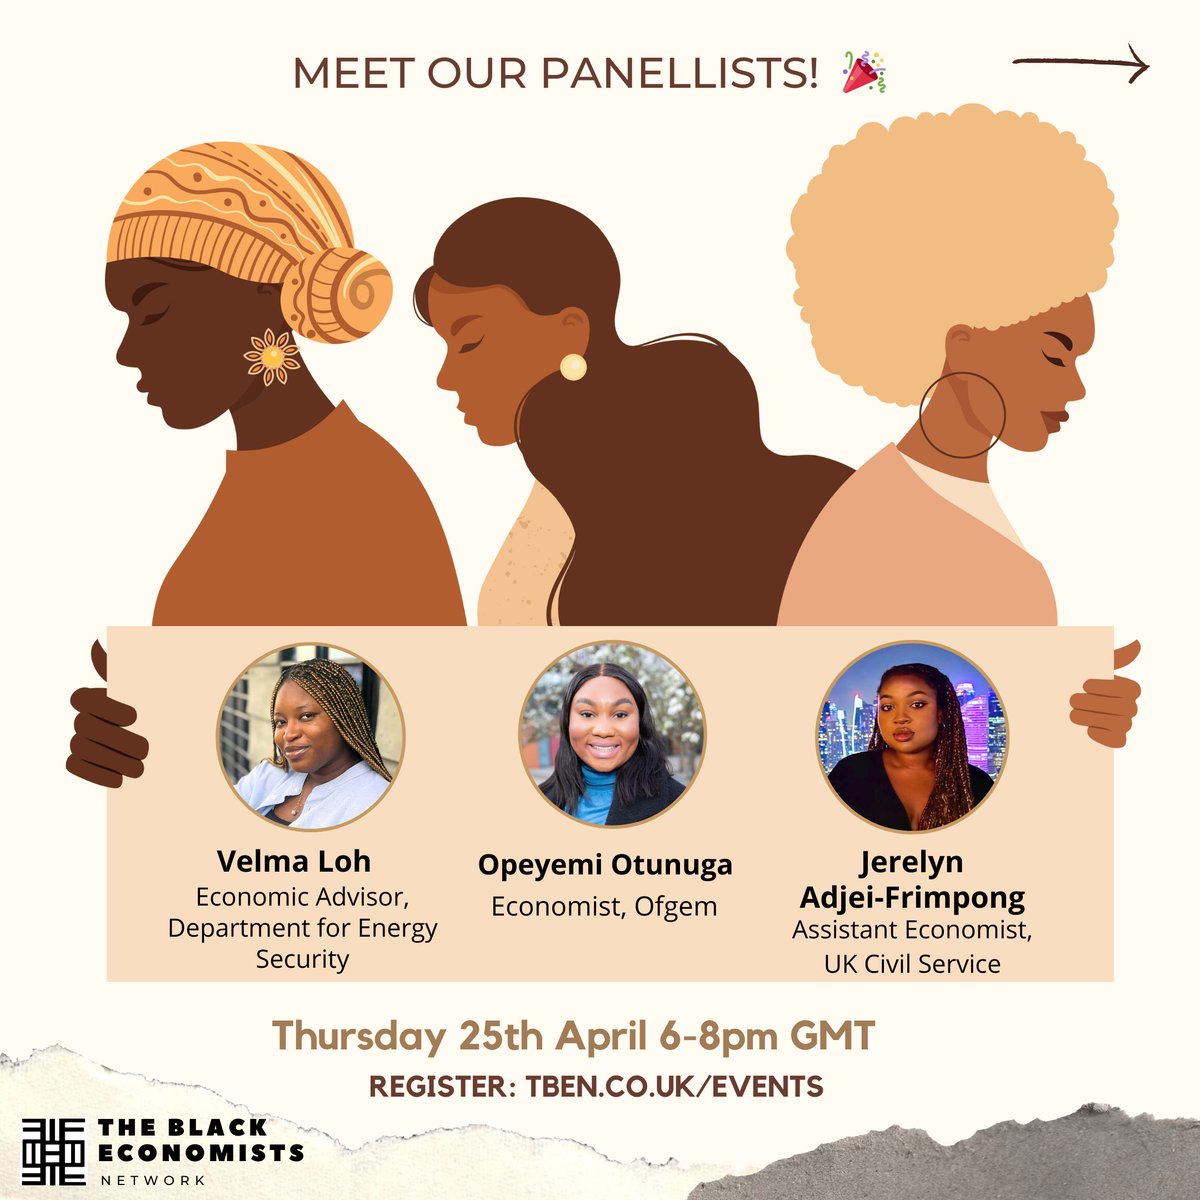 6 DAYS TO GO! 🎉 We’re excited for our next upcoming social event honouring the trailblazing contributions of Black female economists. Are you looking for a space to meet & build connections with like-minded people? Join us! Get your (free!) ticket here: buff.ly/3TSEDS7